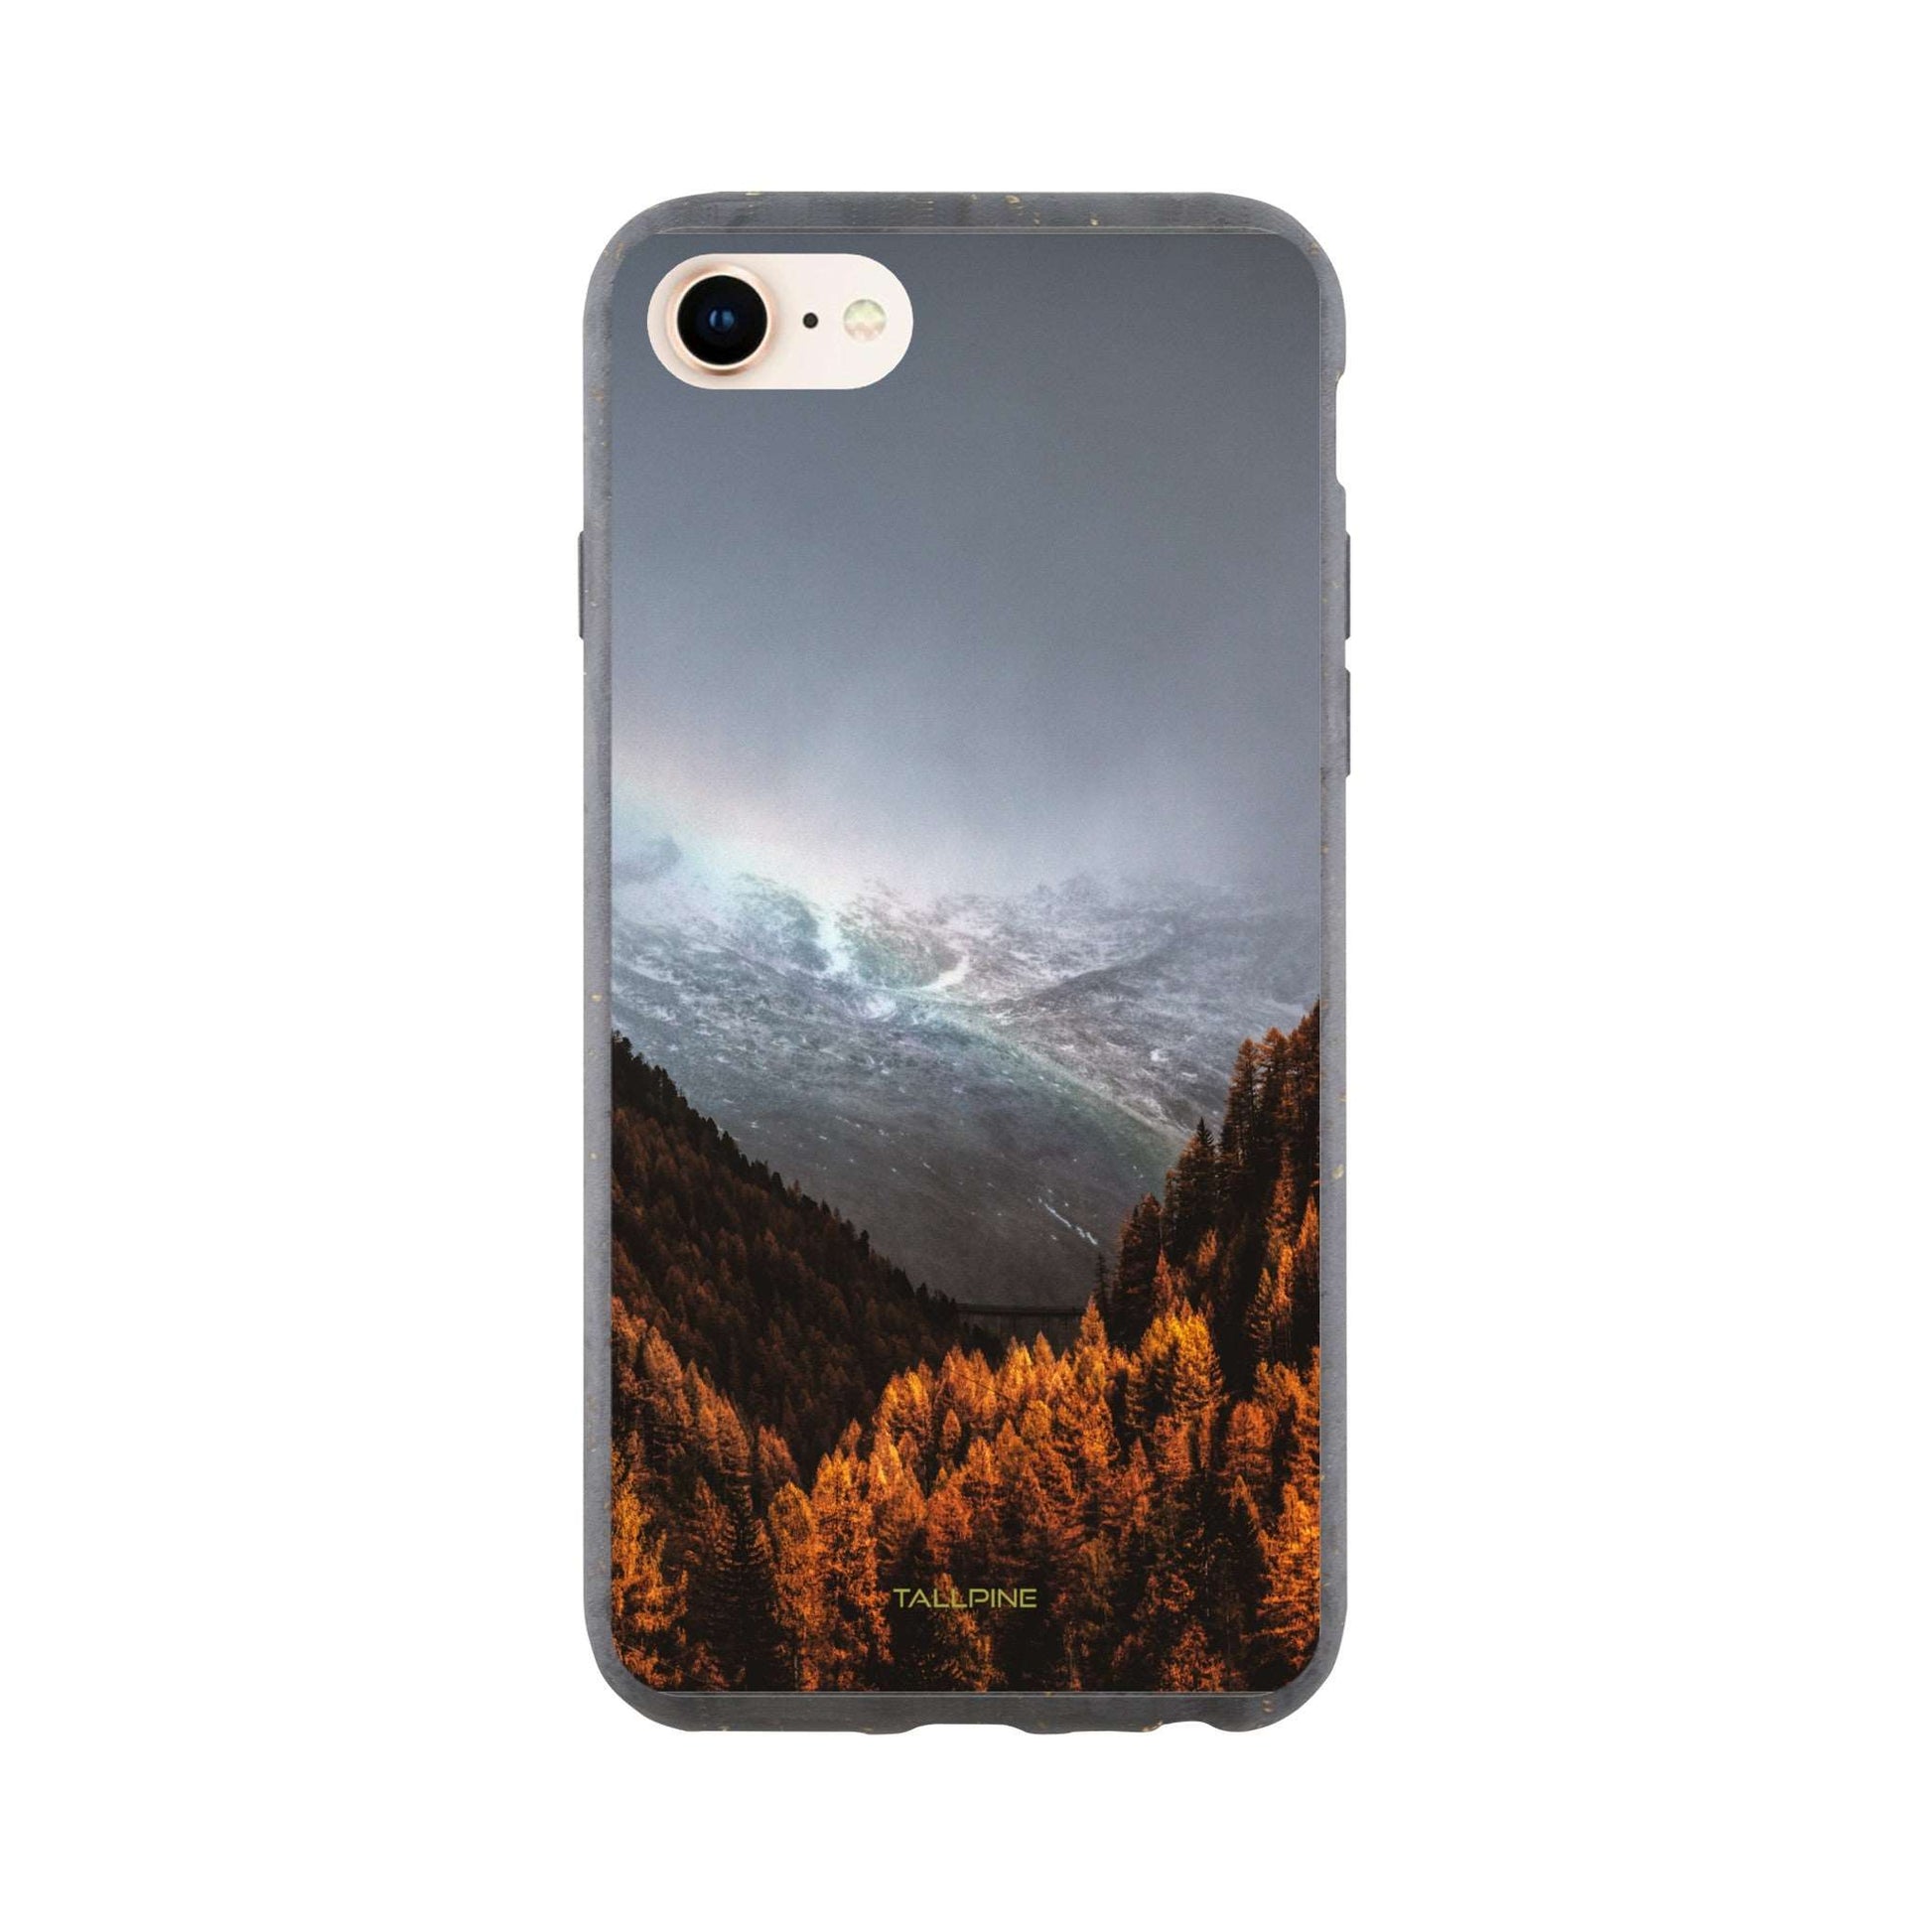 Autumn Mountain - Eco Case iPhone 8 - Tallpine Cases | Sustainable and Eco-Friendly Phone Cases - Autumn Mountain Nature